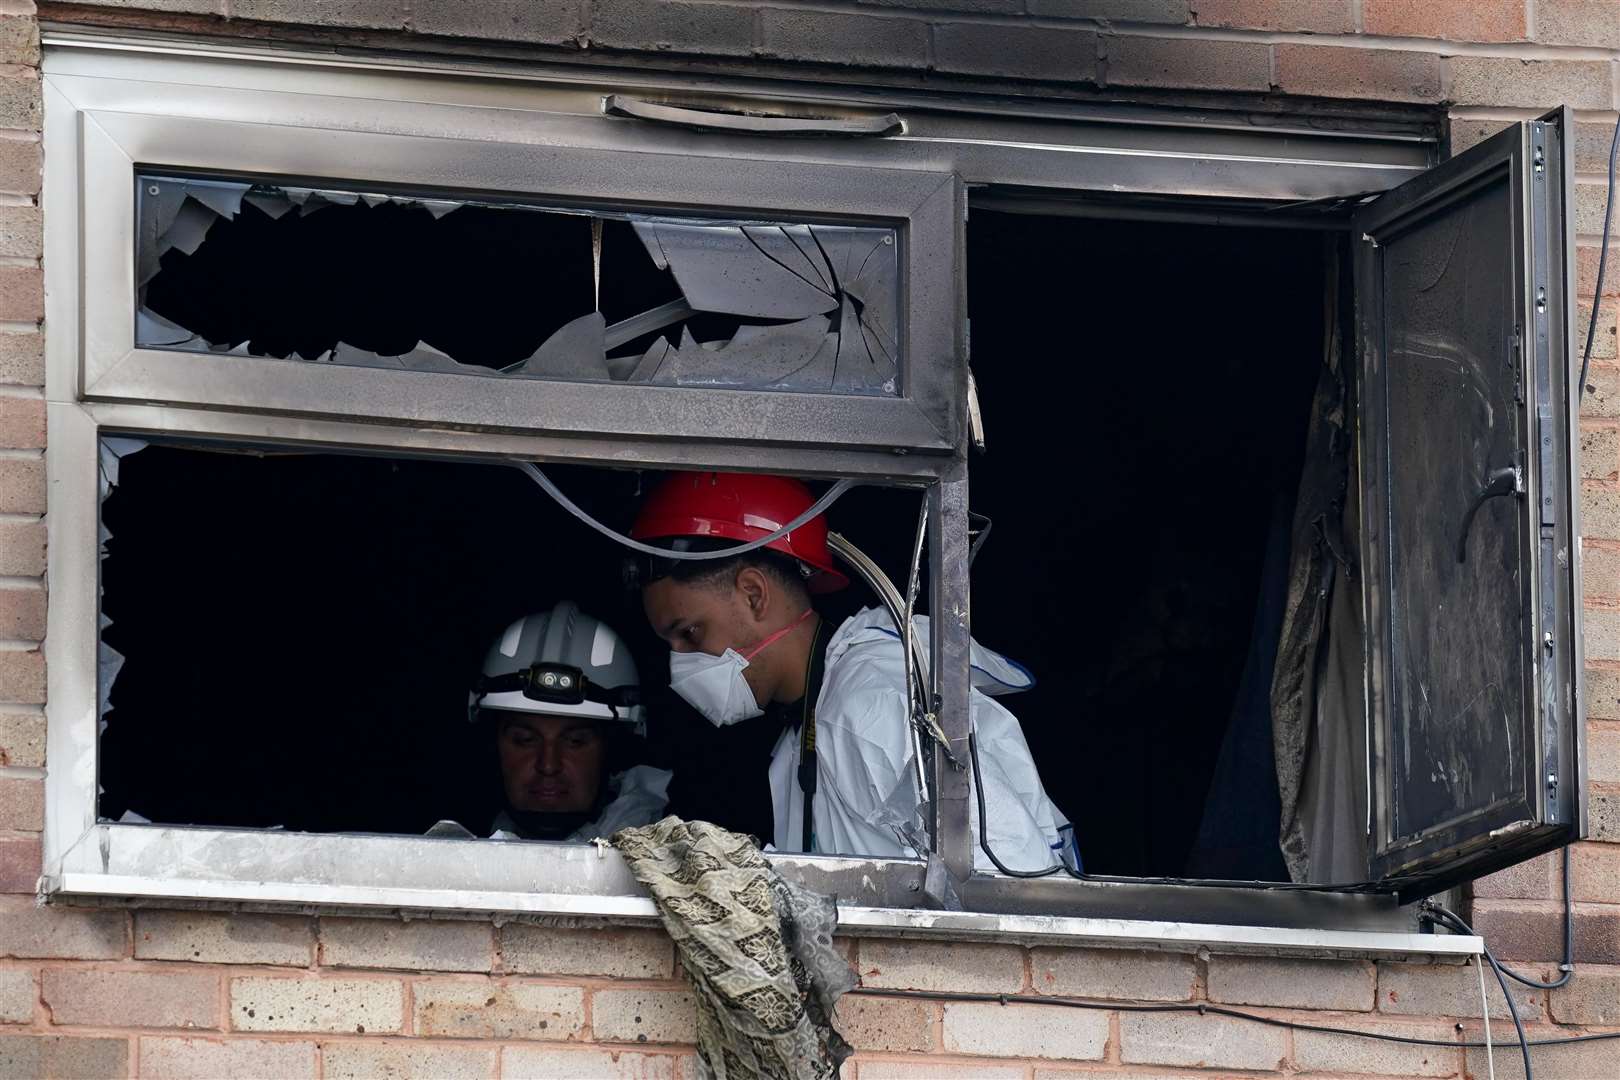 Fire investigators examine an upstairs room at the house (Jacob King/PA)